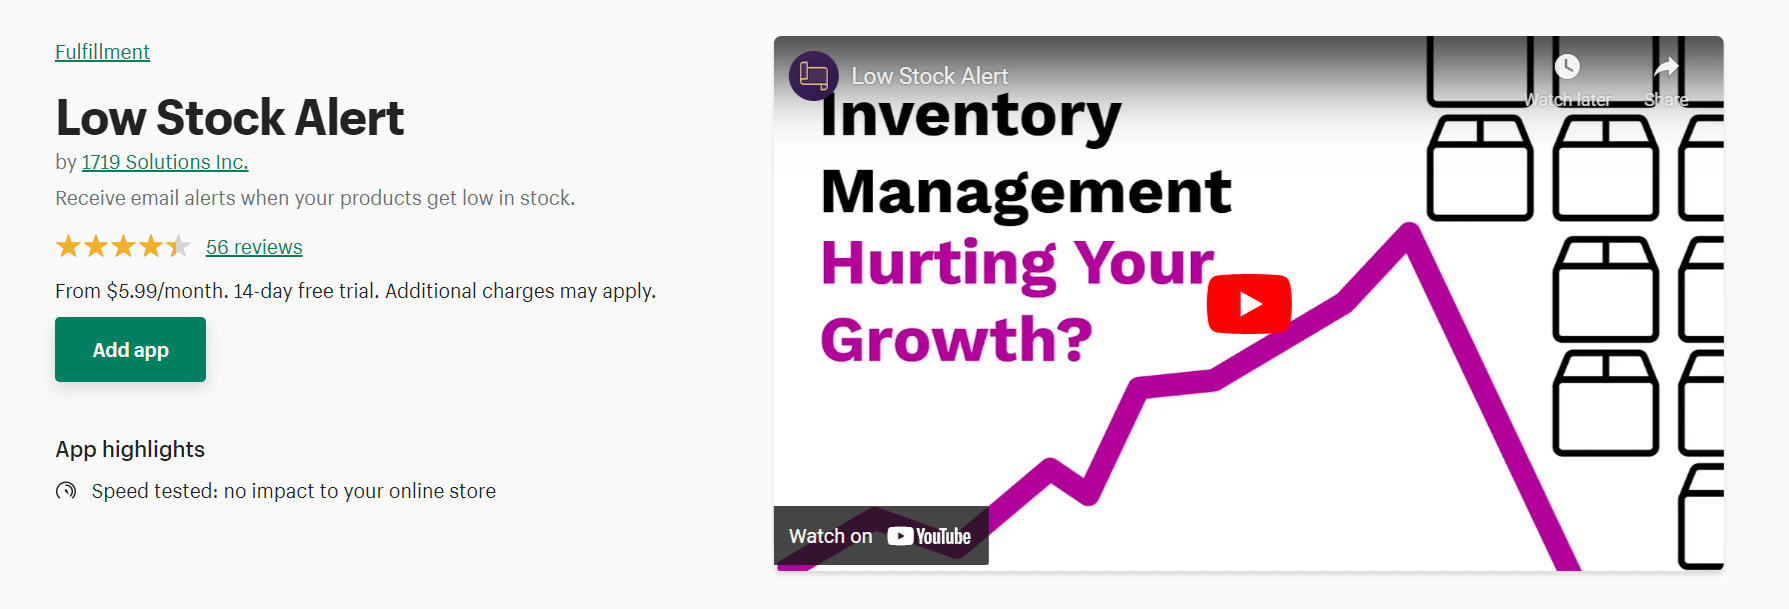 Low Stock Alert inventory management tool